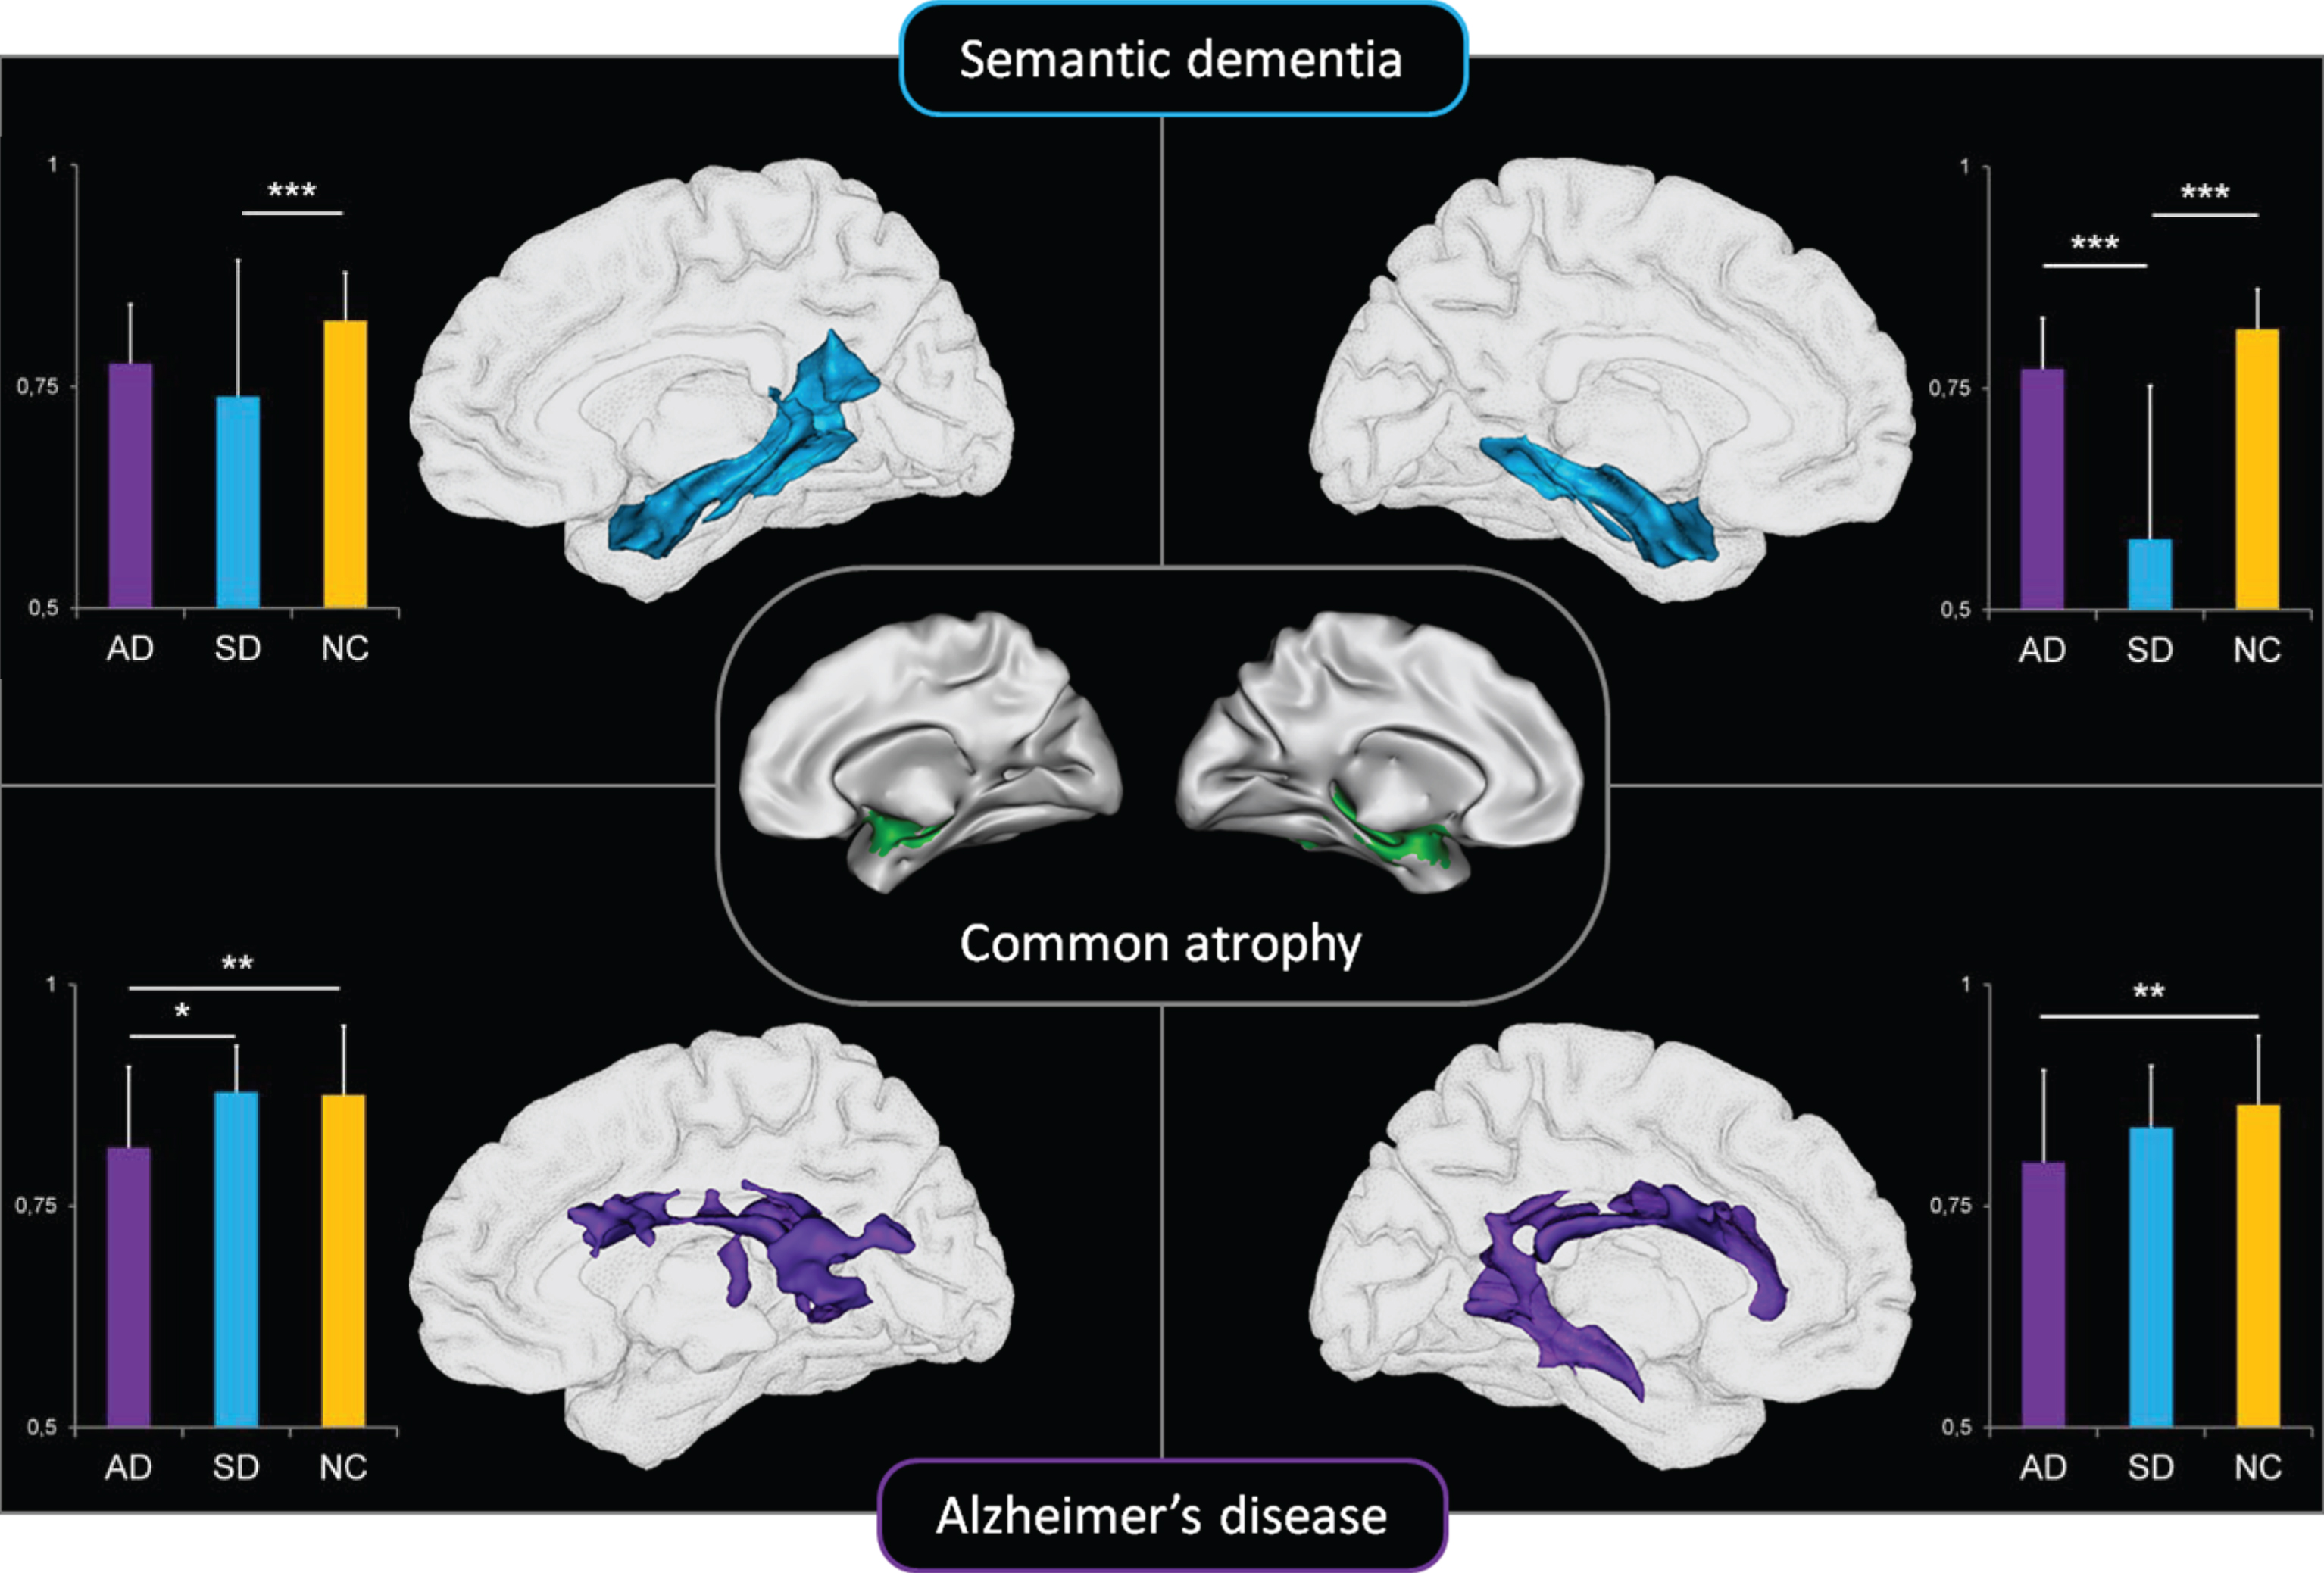 Relationships between medial temporal lobe atrophy common to AD and SD (center panel) and whole-brain white matter density maps in patients with AD (top panel) and semantic dementia (bottom panel). From [45].